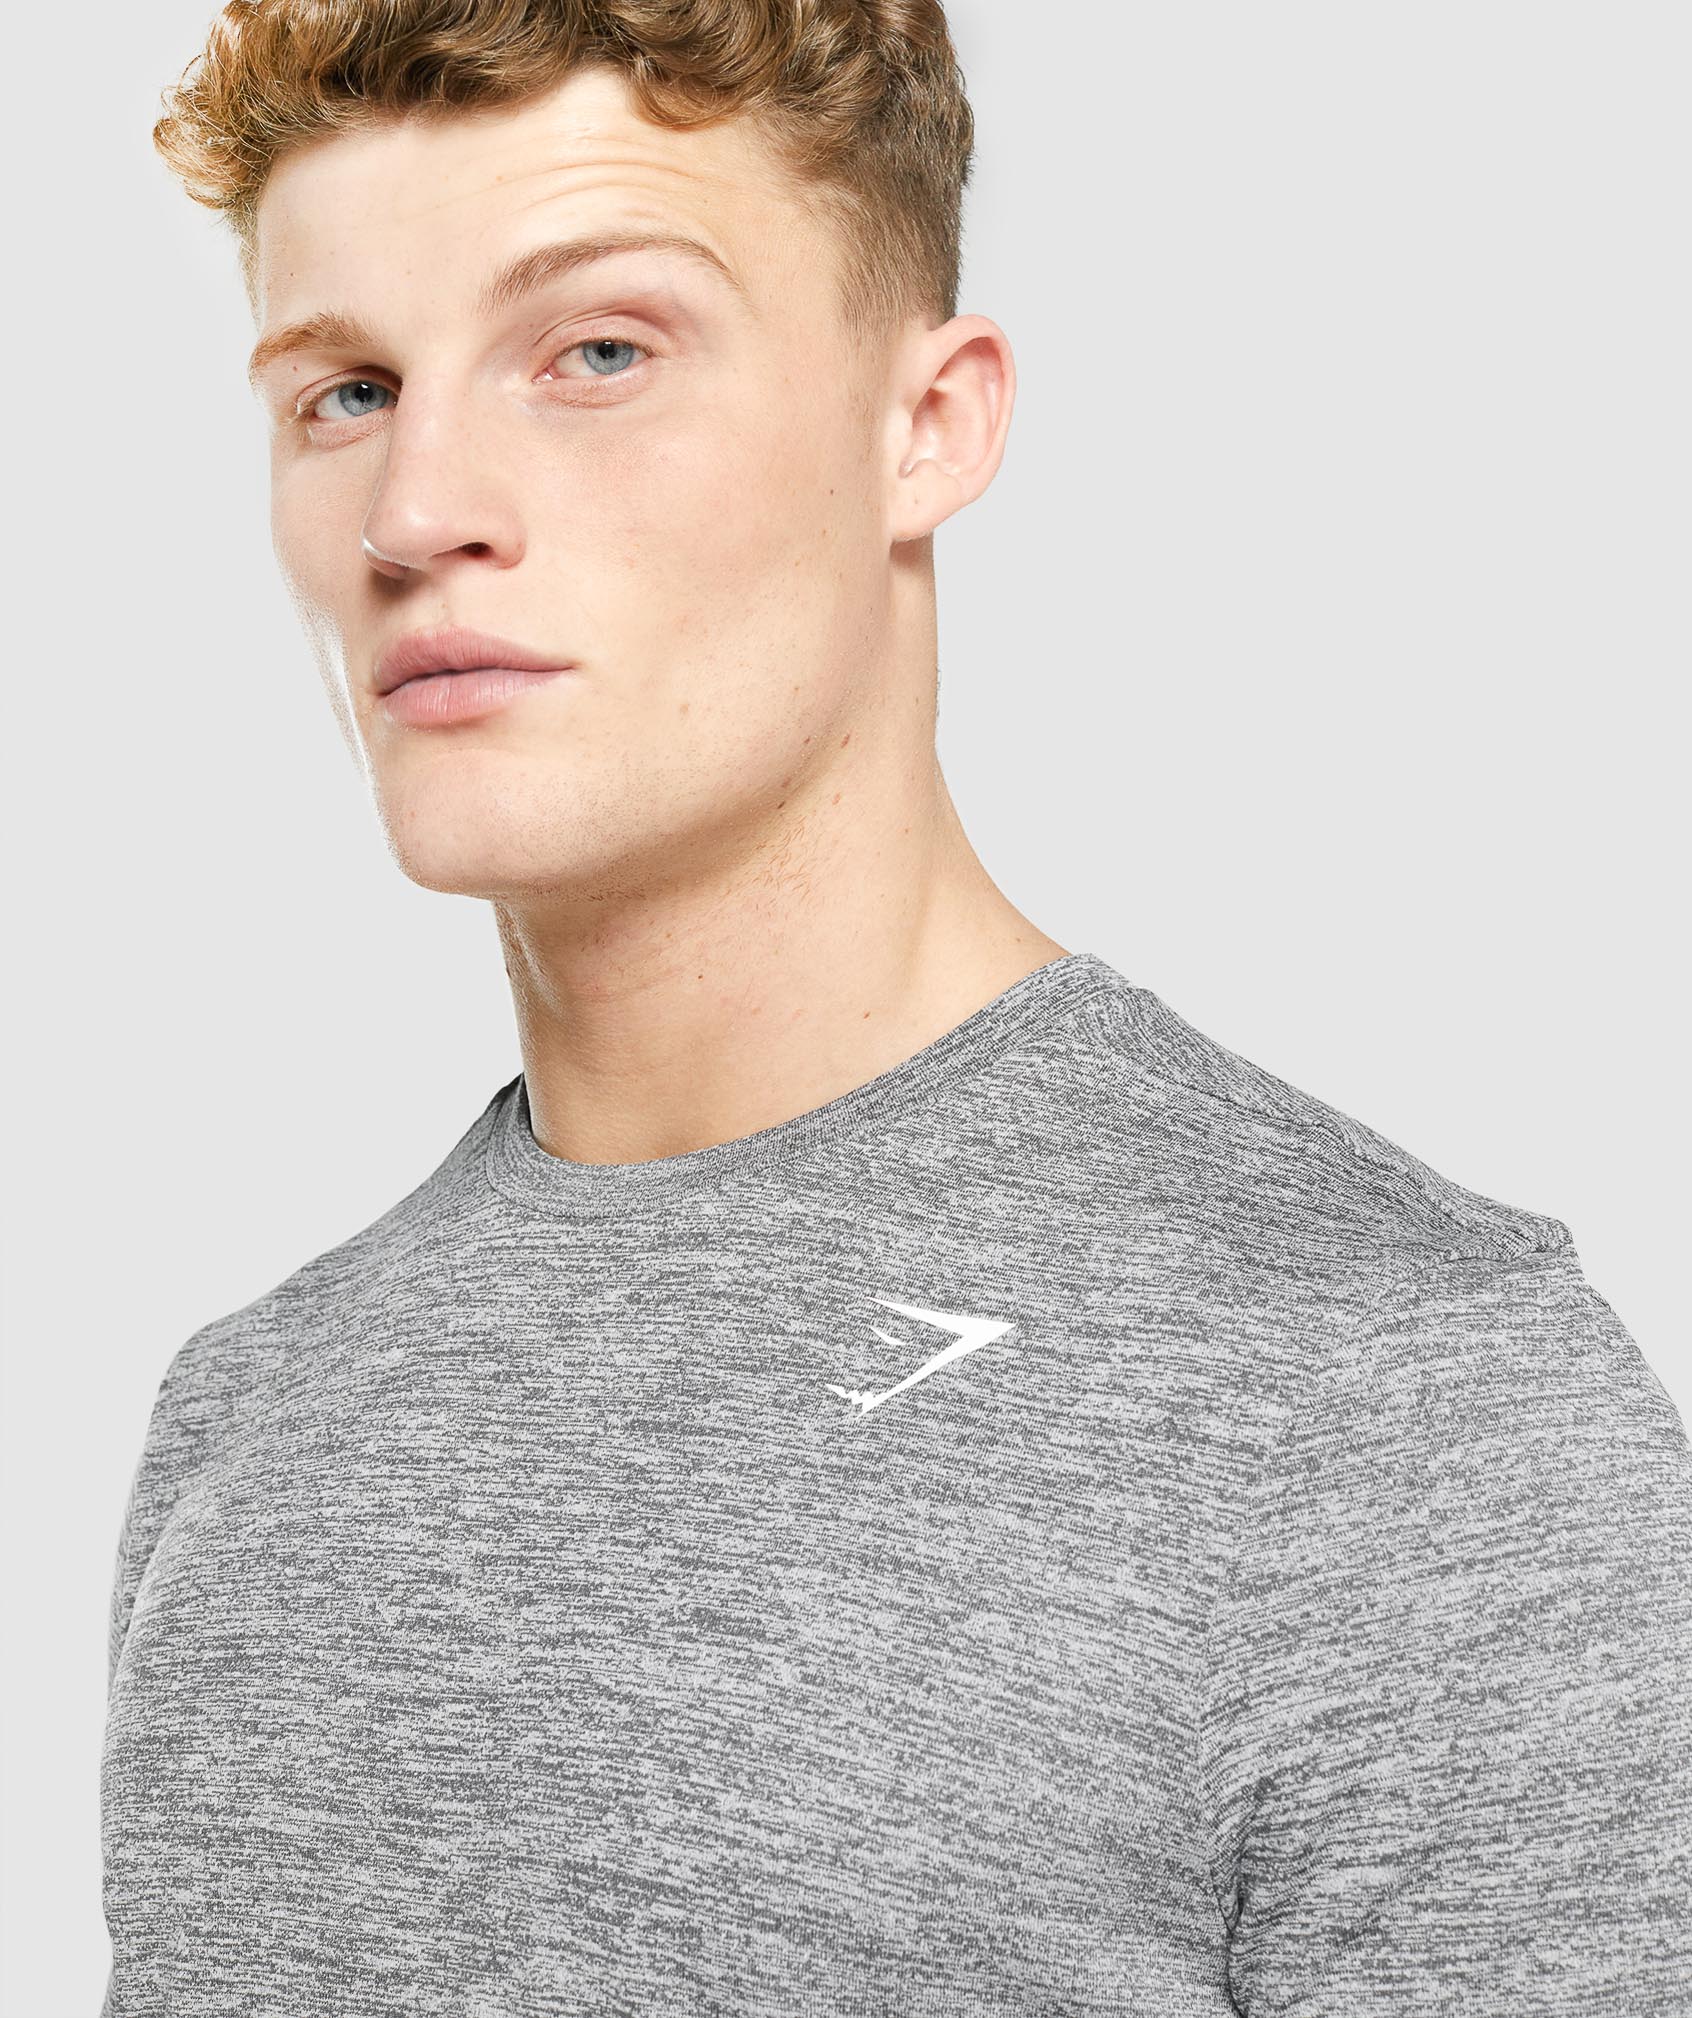 Arrival Marl Long Sleeve T-Shirt in Charcoal Marl